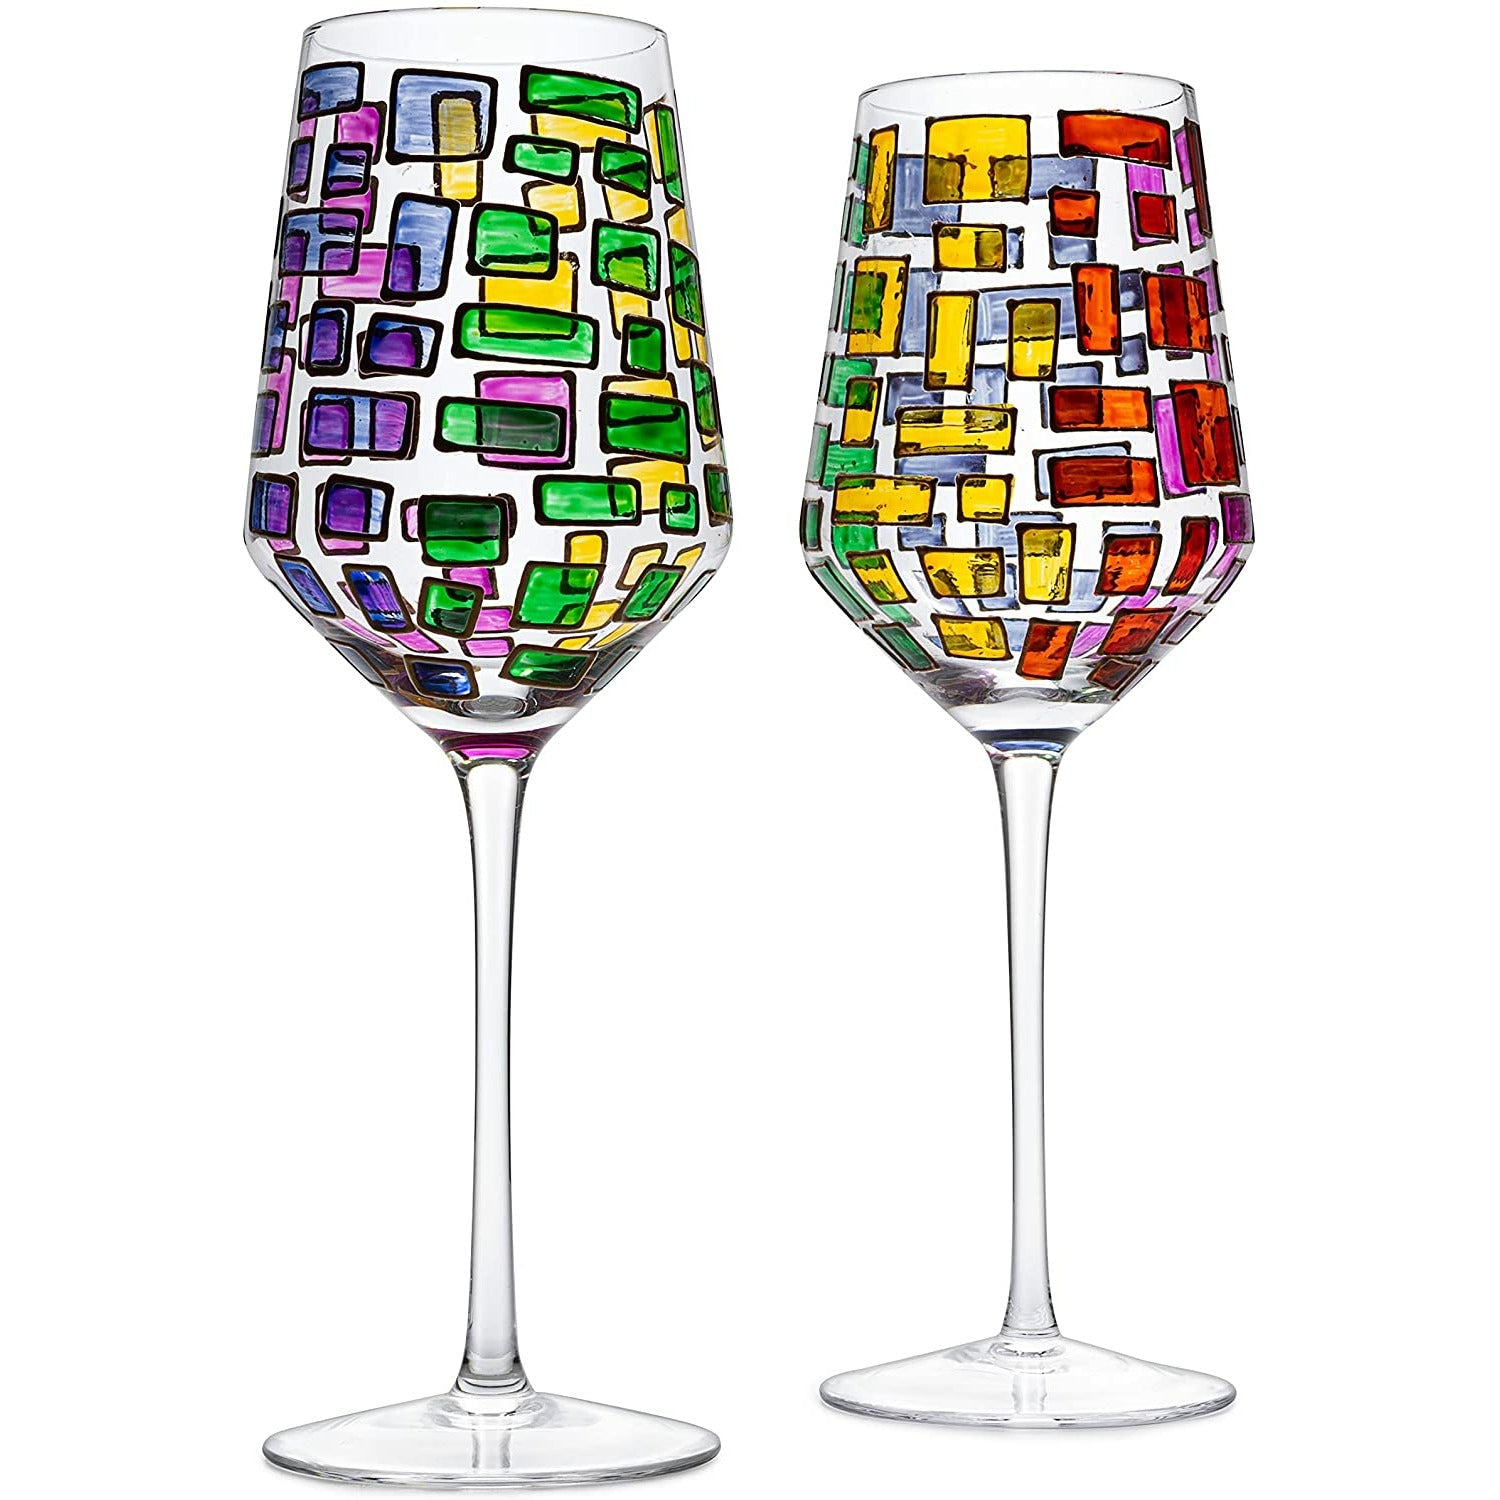 Renaissance Stained Glass Rainbow Stemless Wine Glasses – Set of 2